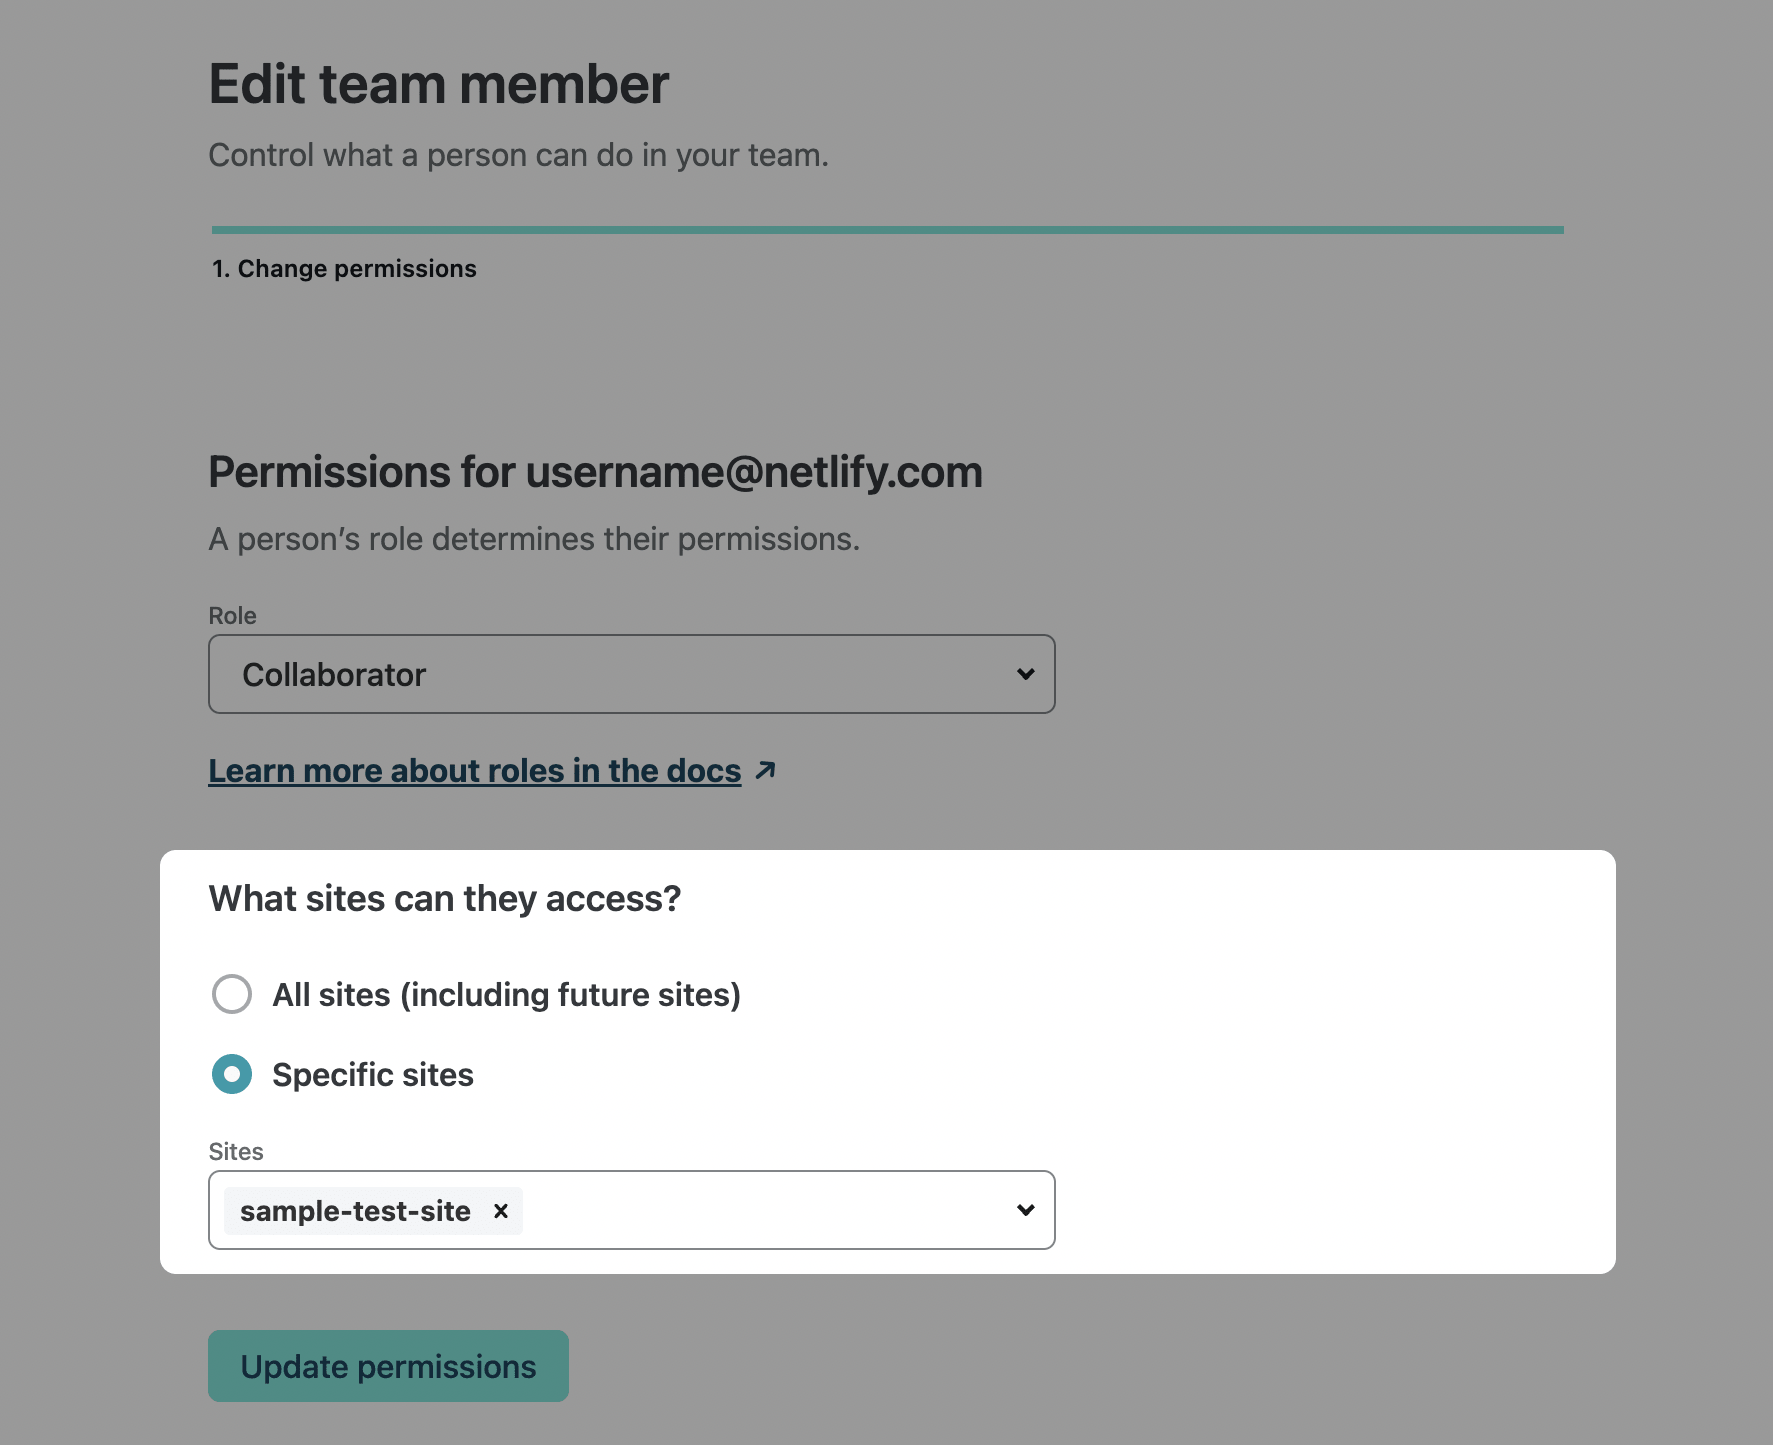 Owners can select the specific sites that a team member can access.